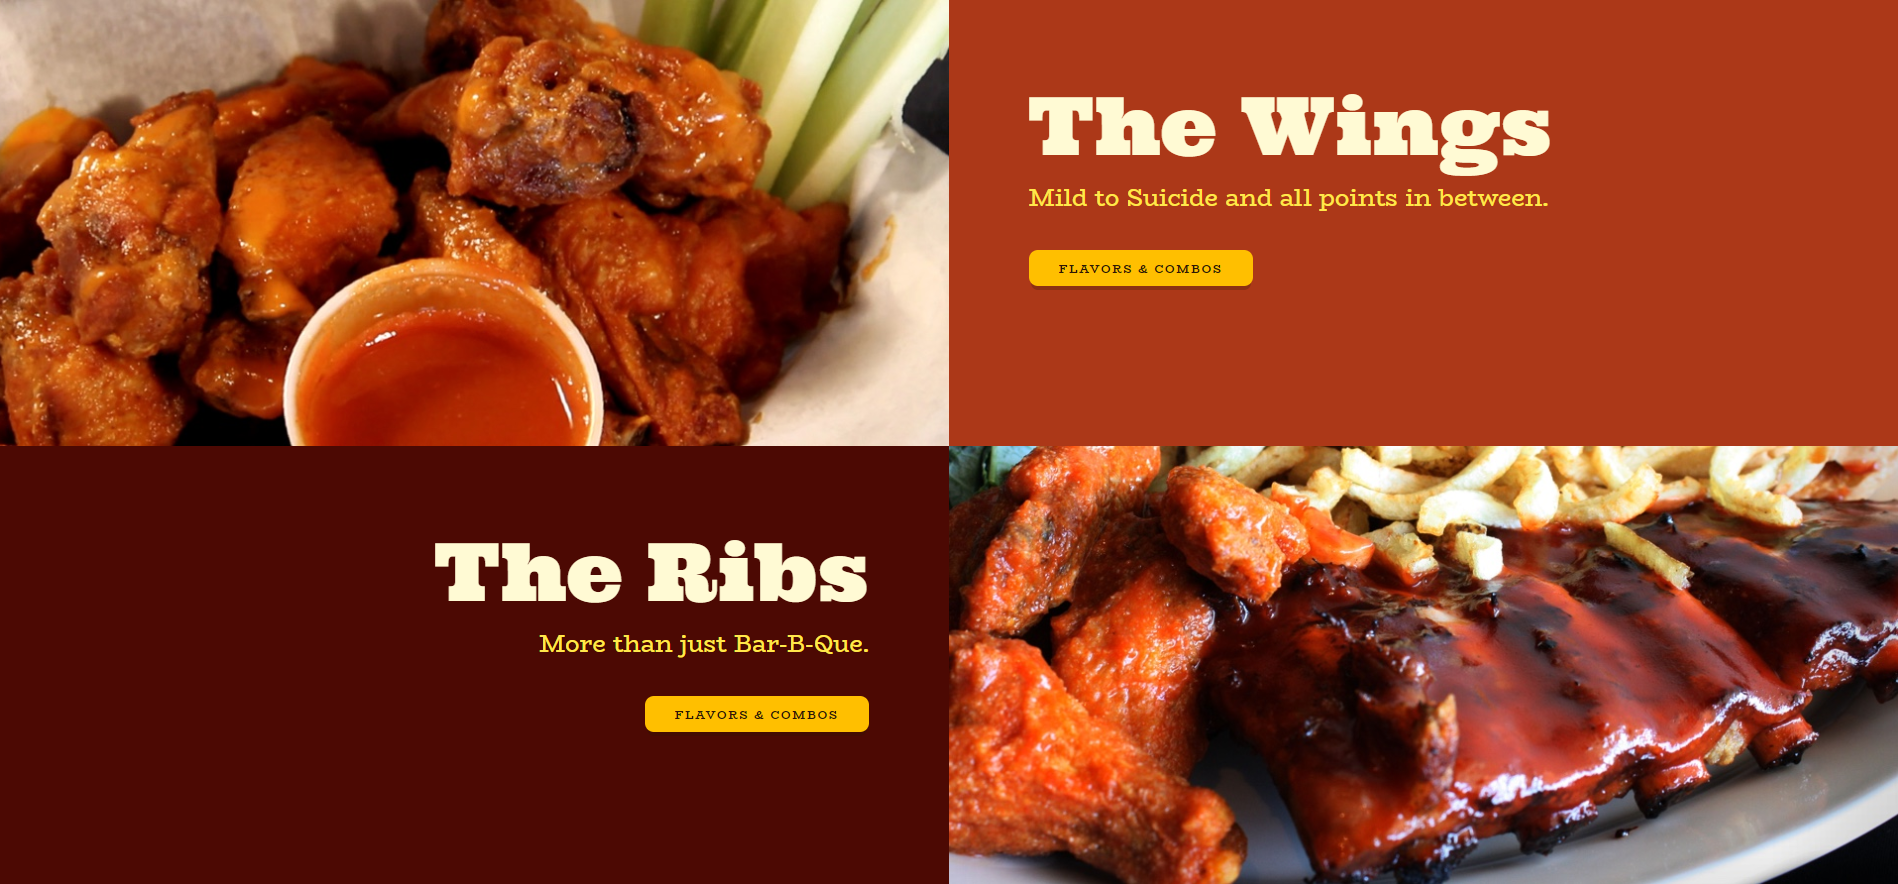 Snippet from Buffalo Wings & Ribs website